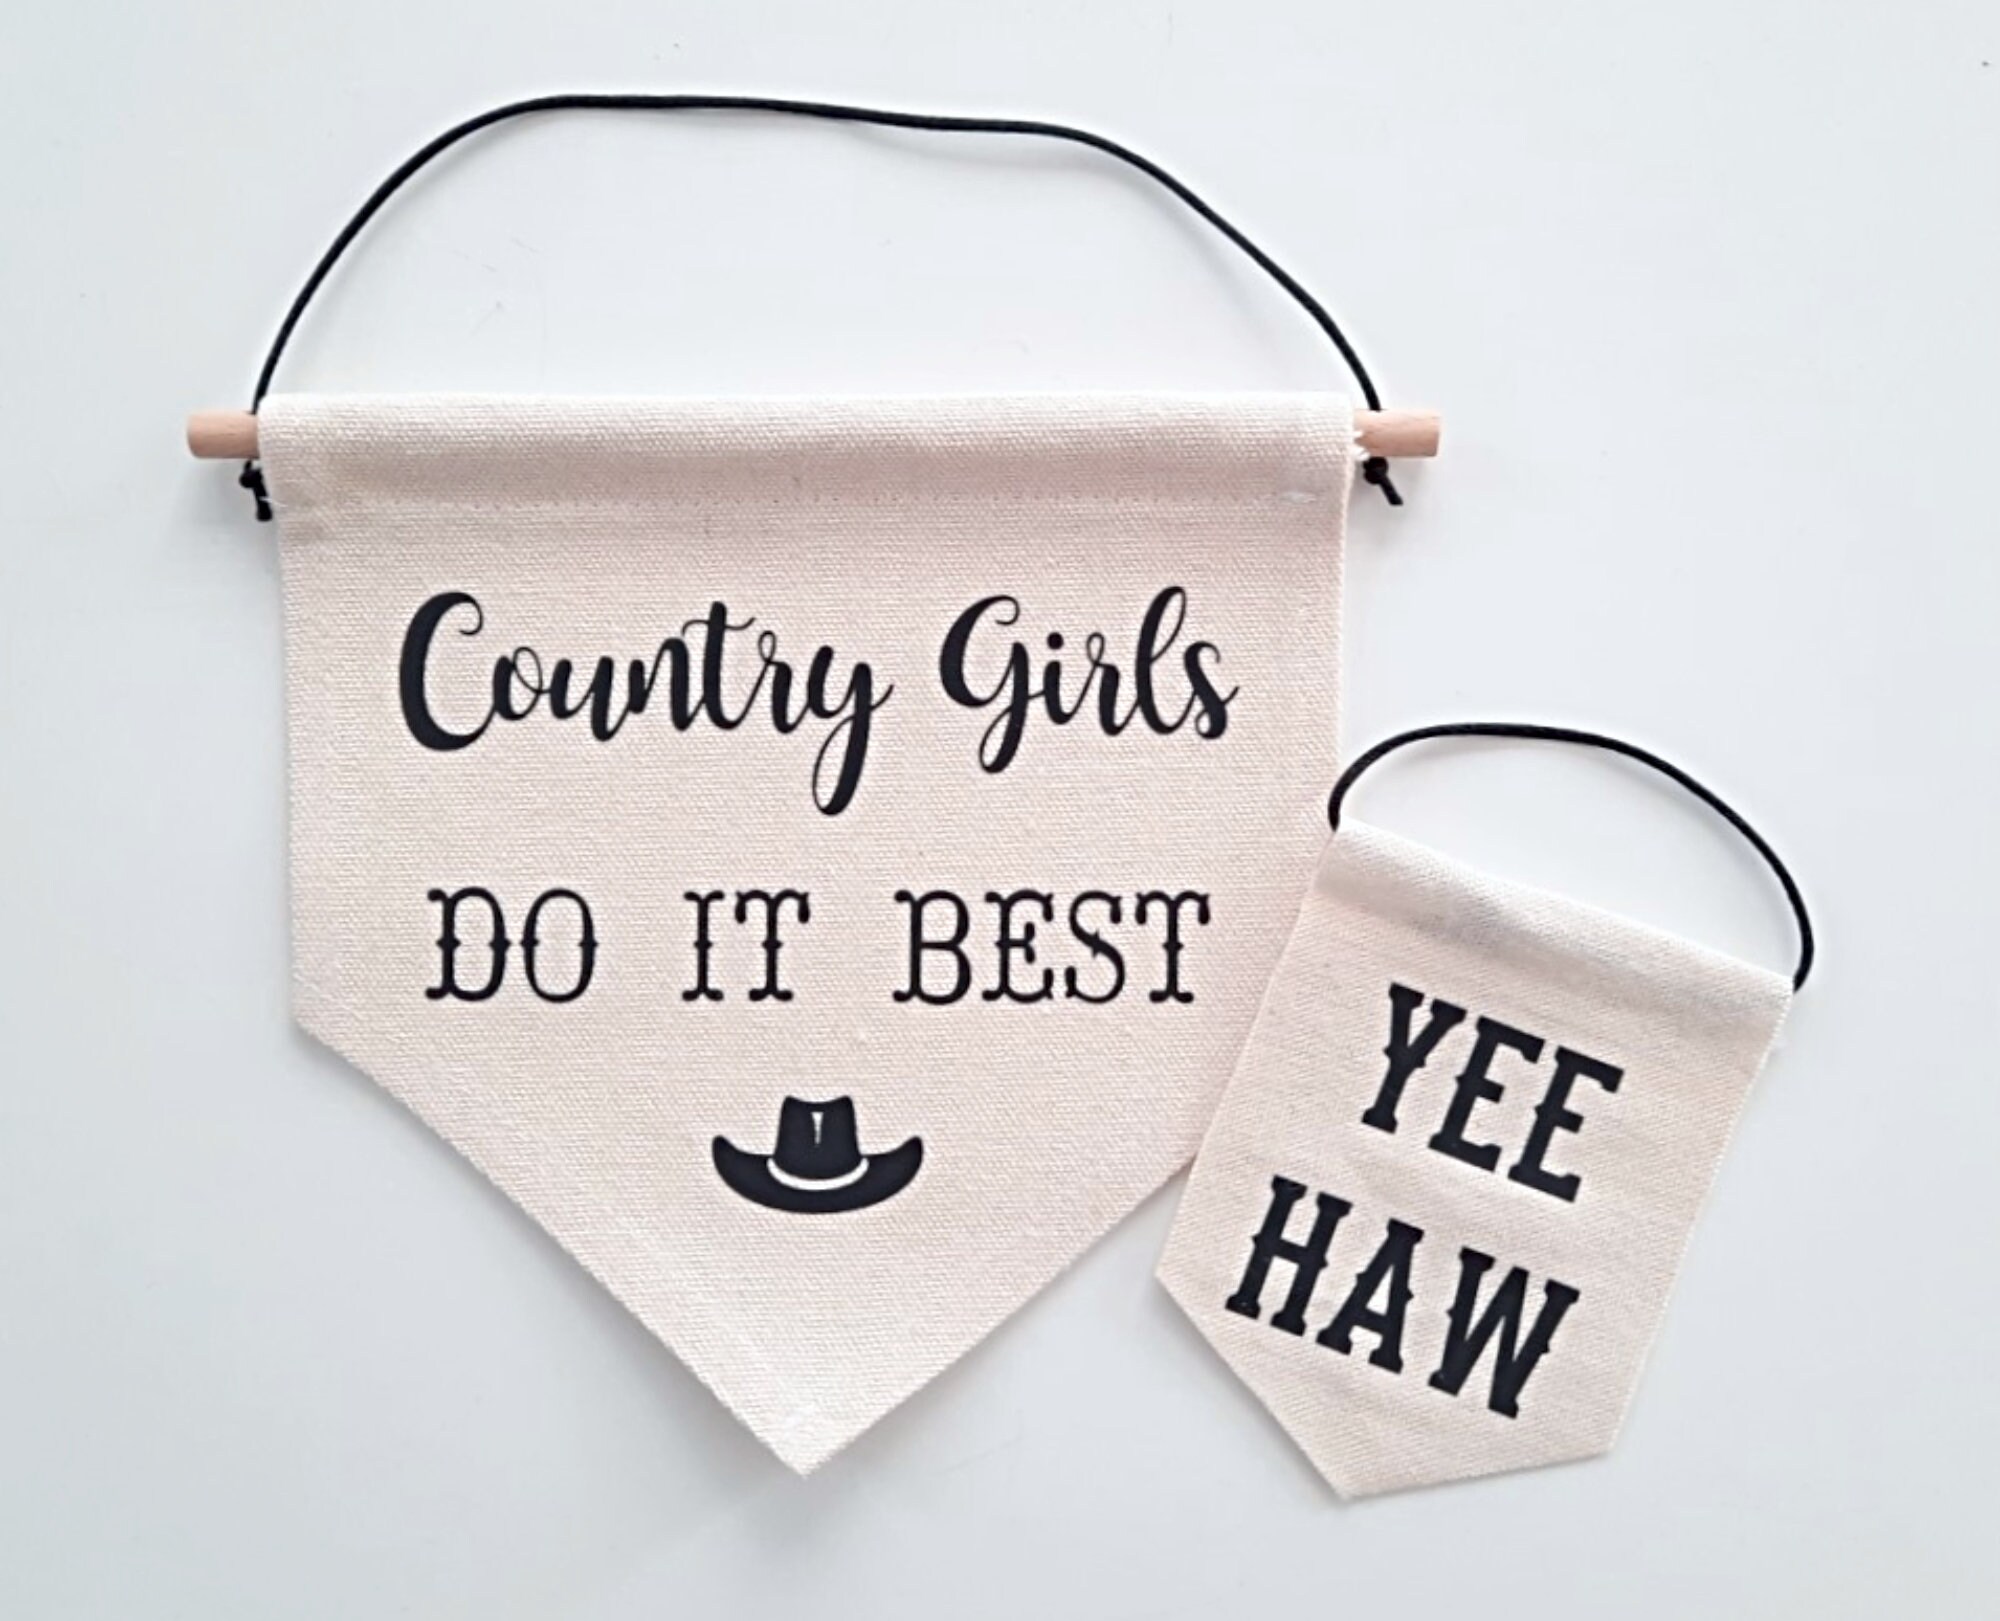 Yee Haw Hanging Canvas Banner